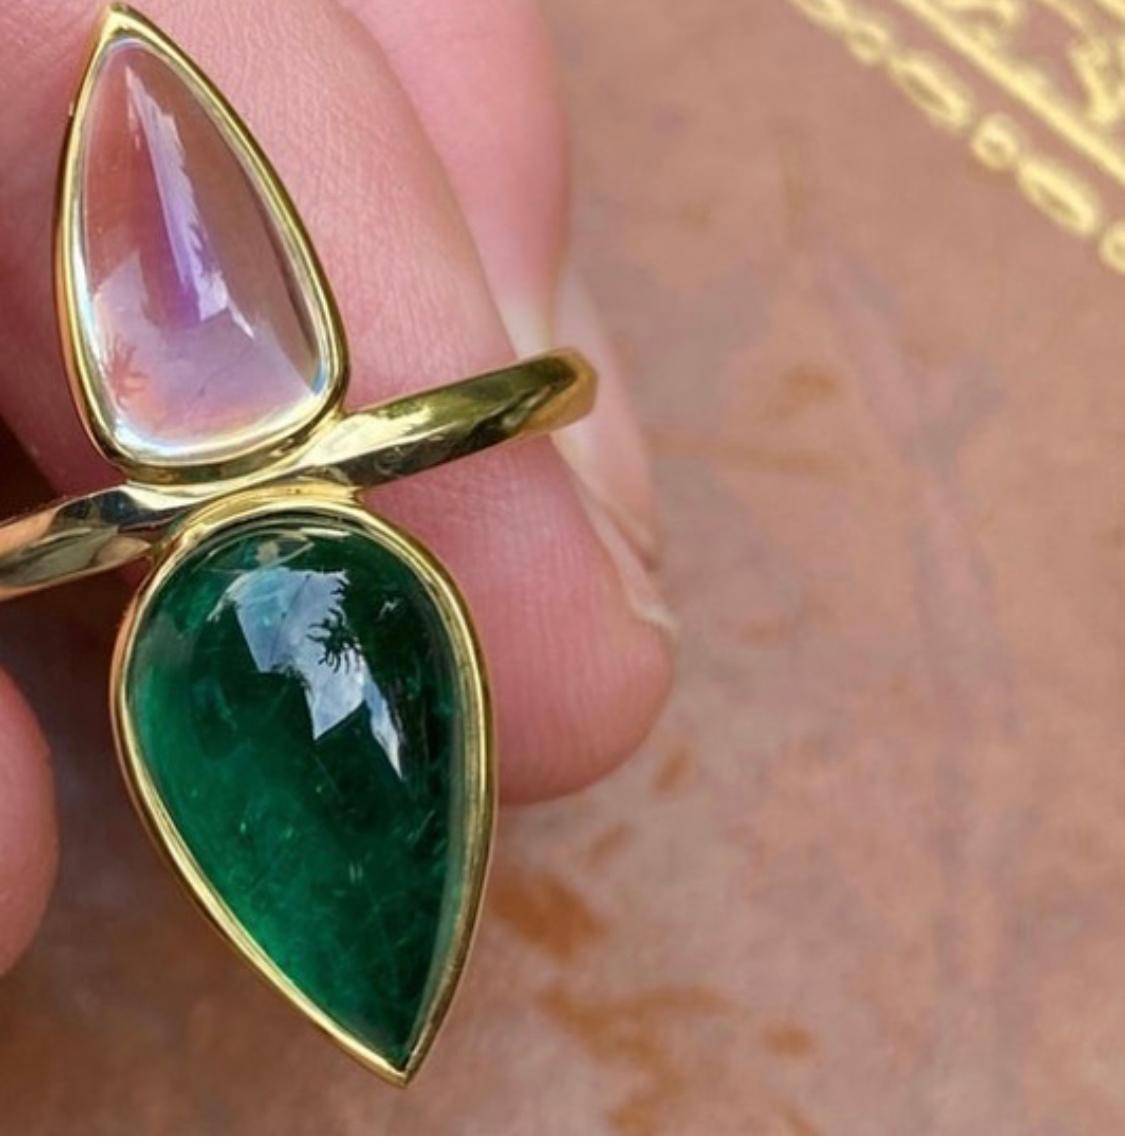 moonstone and emerald together